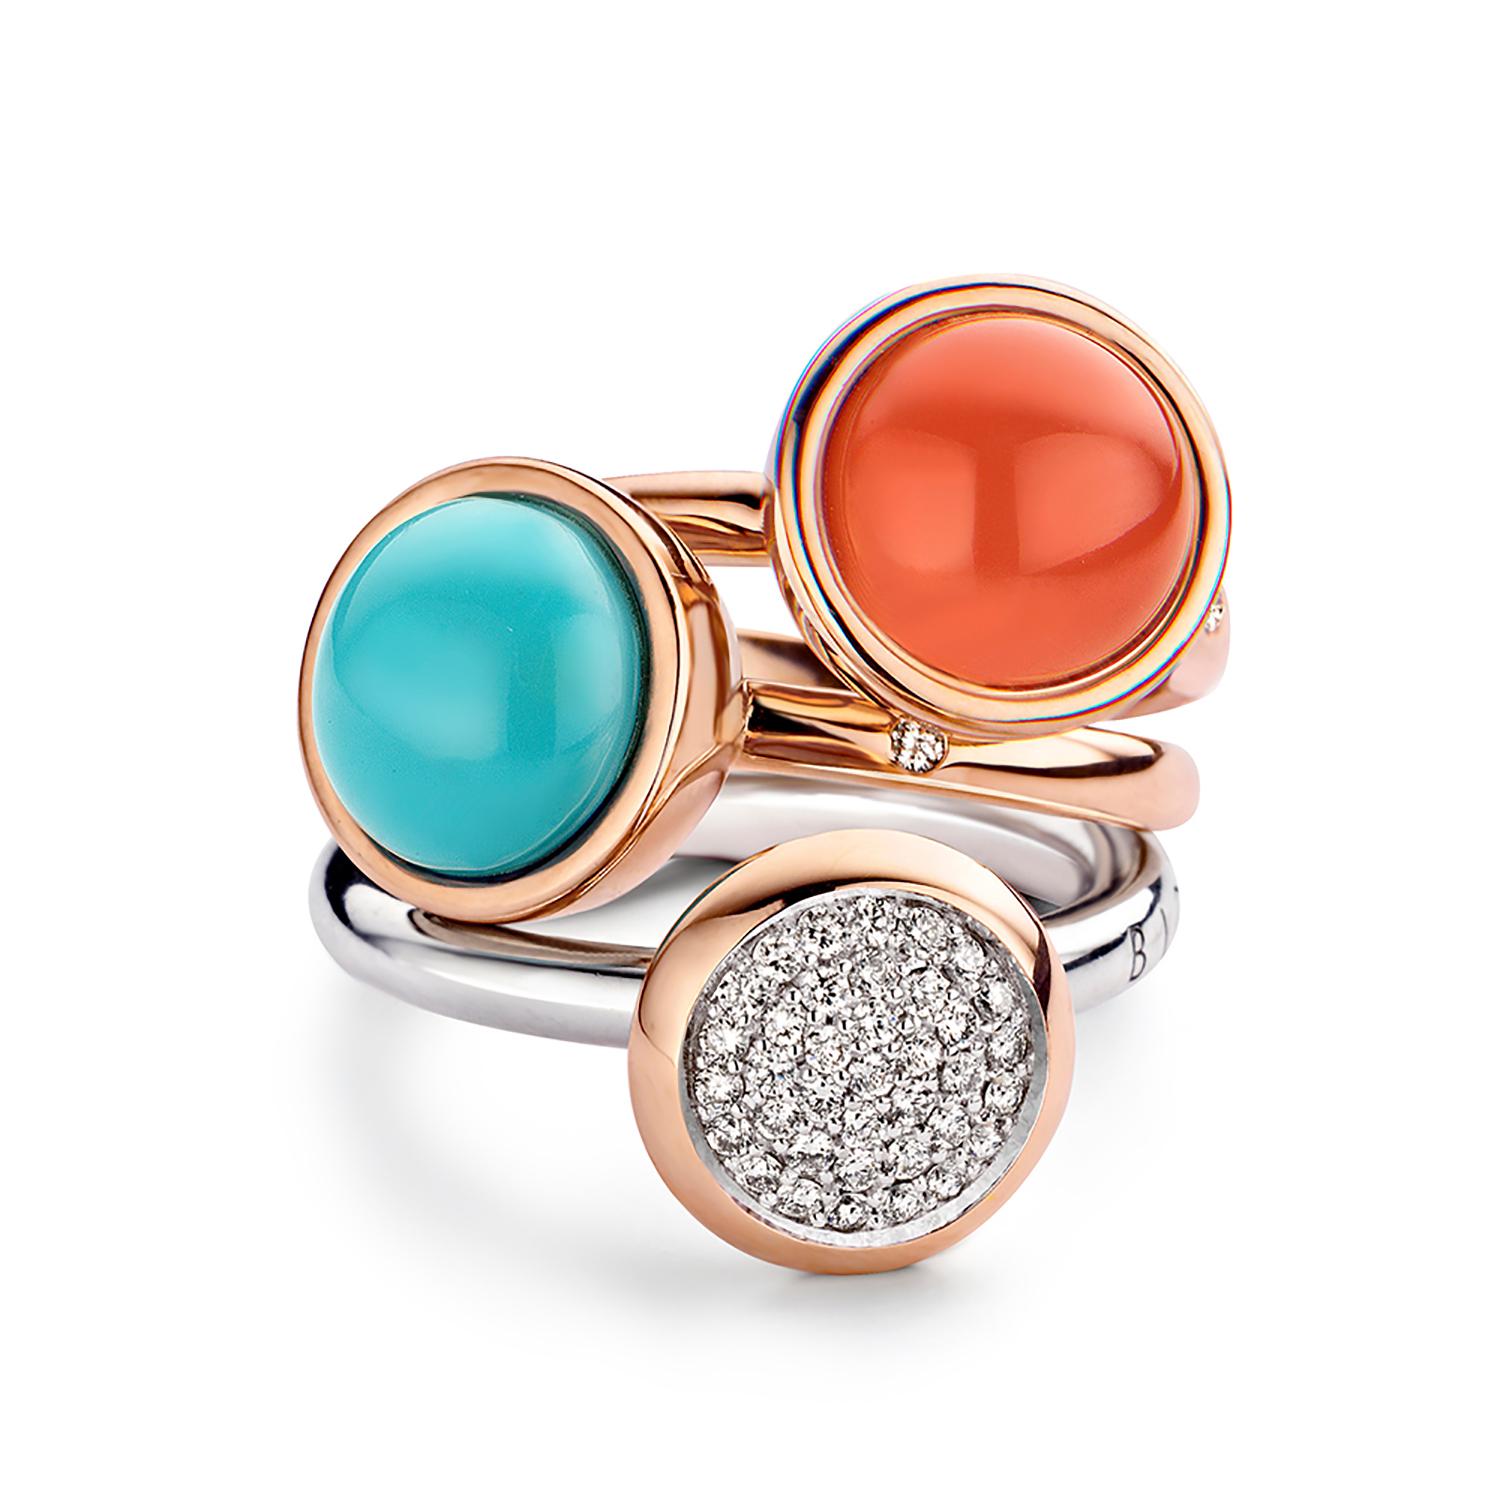 Cabochon Milky Quartaz with Coral Ring in 18ct Gold by Bigli For Sale